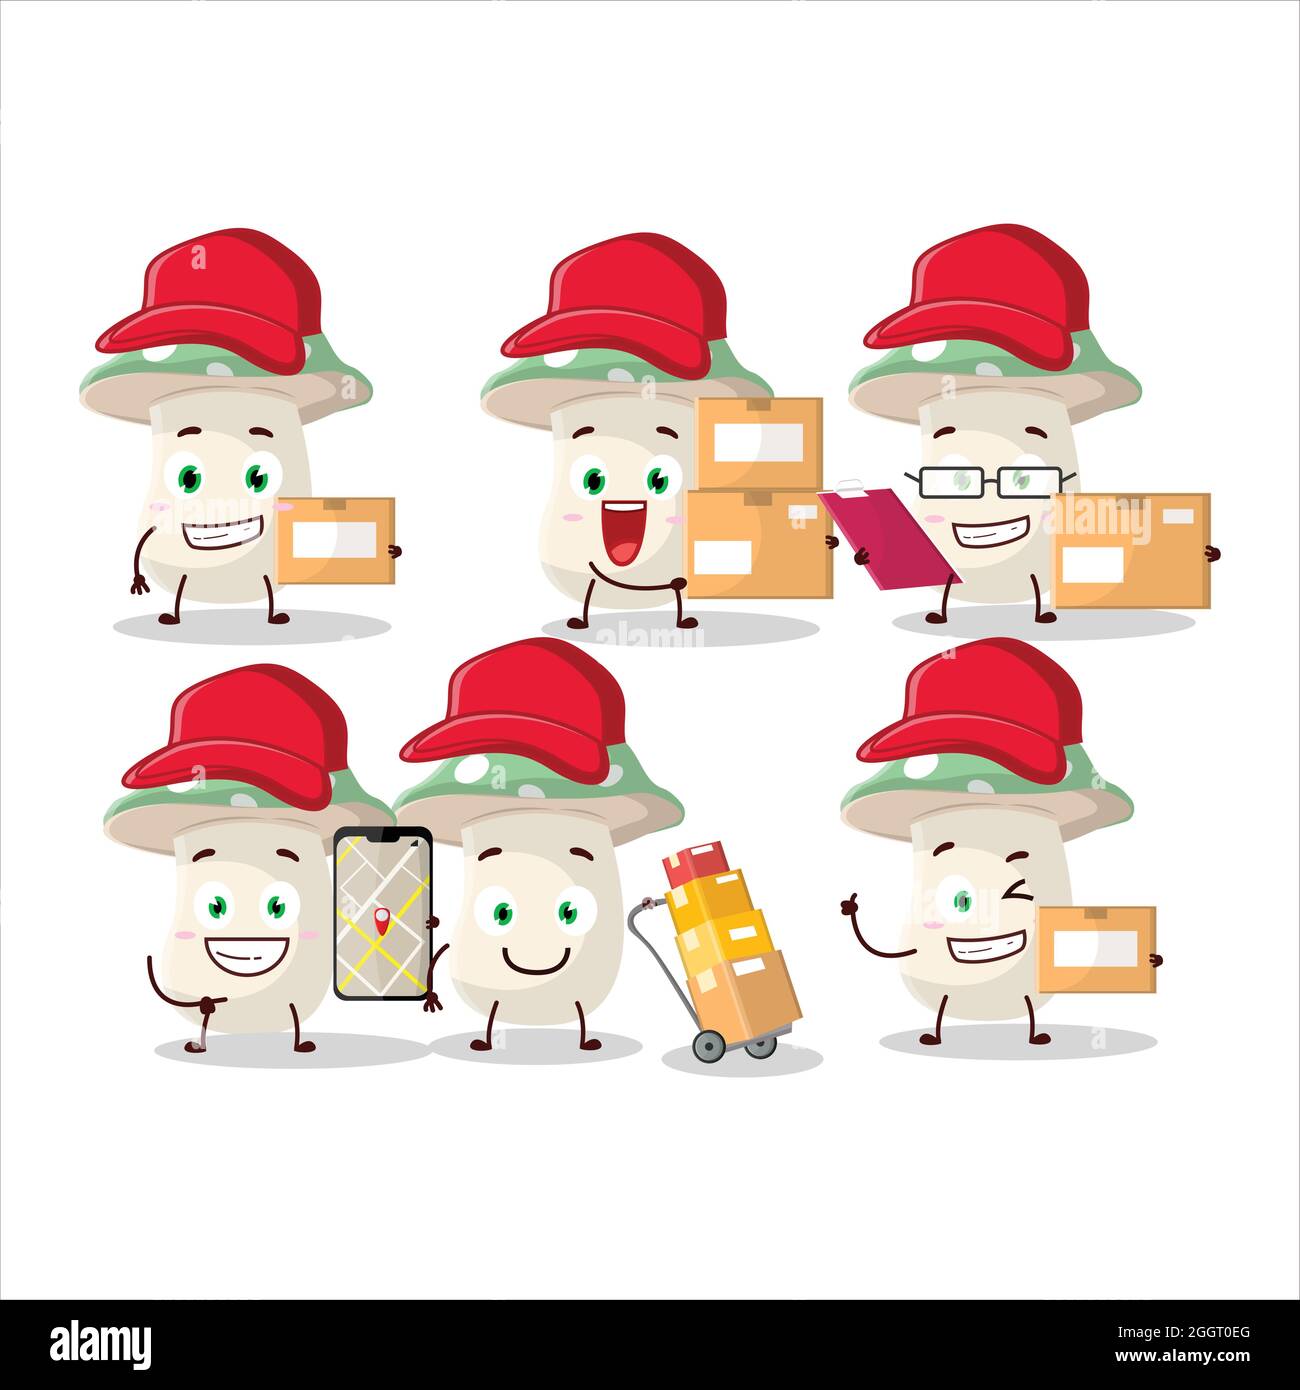 Cartoon character design of green amanita working as a courier. Vector illustration Stock Vector